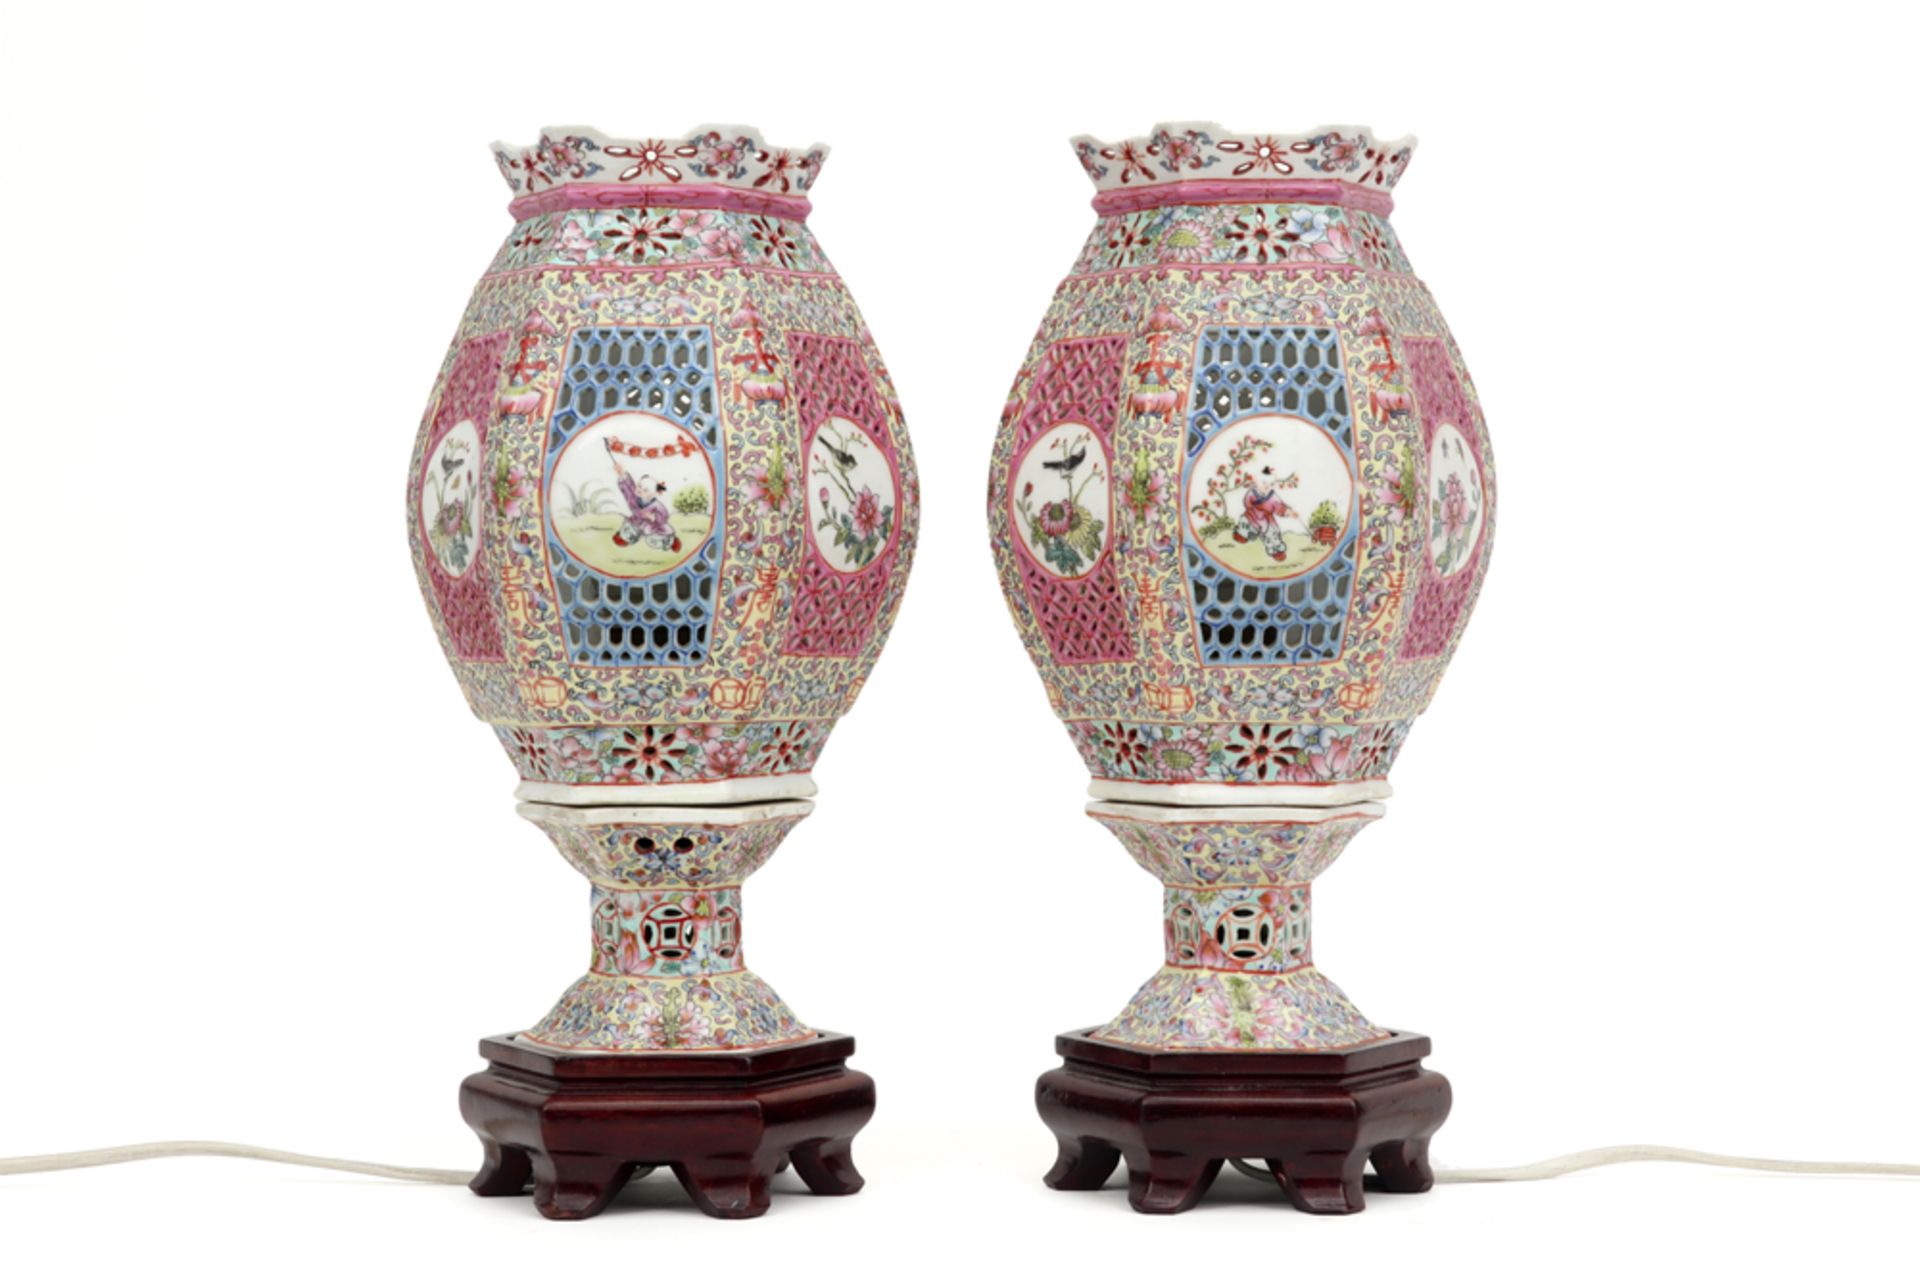 pair of nice 'antique' Chinese lamps with fine ajour shades in porcelain with 'Famille Rose' - Image 2 of 4